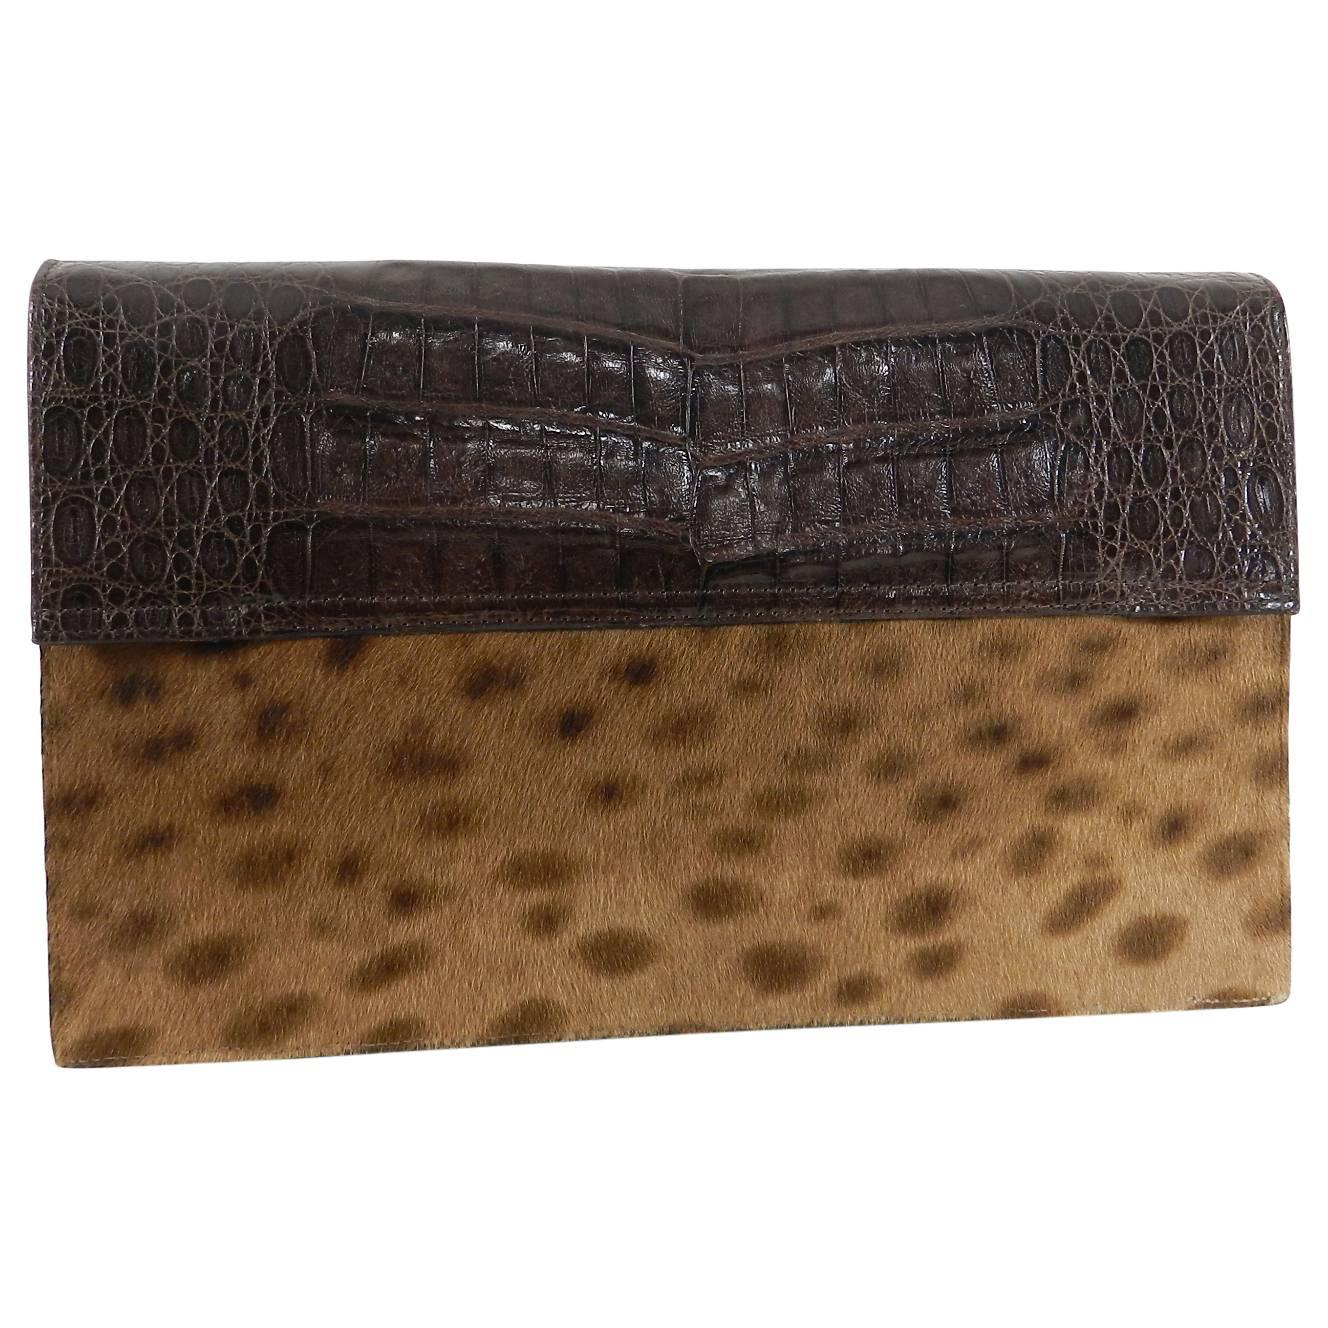 Nancy Gonzalez Brown Crocodile and Faux Leopard Calf hair Clutch Bag.  Envelope style bag with magnetic closures and multi pockets at front.  Excellent pre-owned. Measures about 10.25 x 6.25 x 2”.  No shoulder strap.